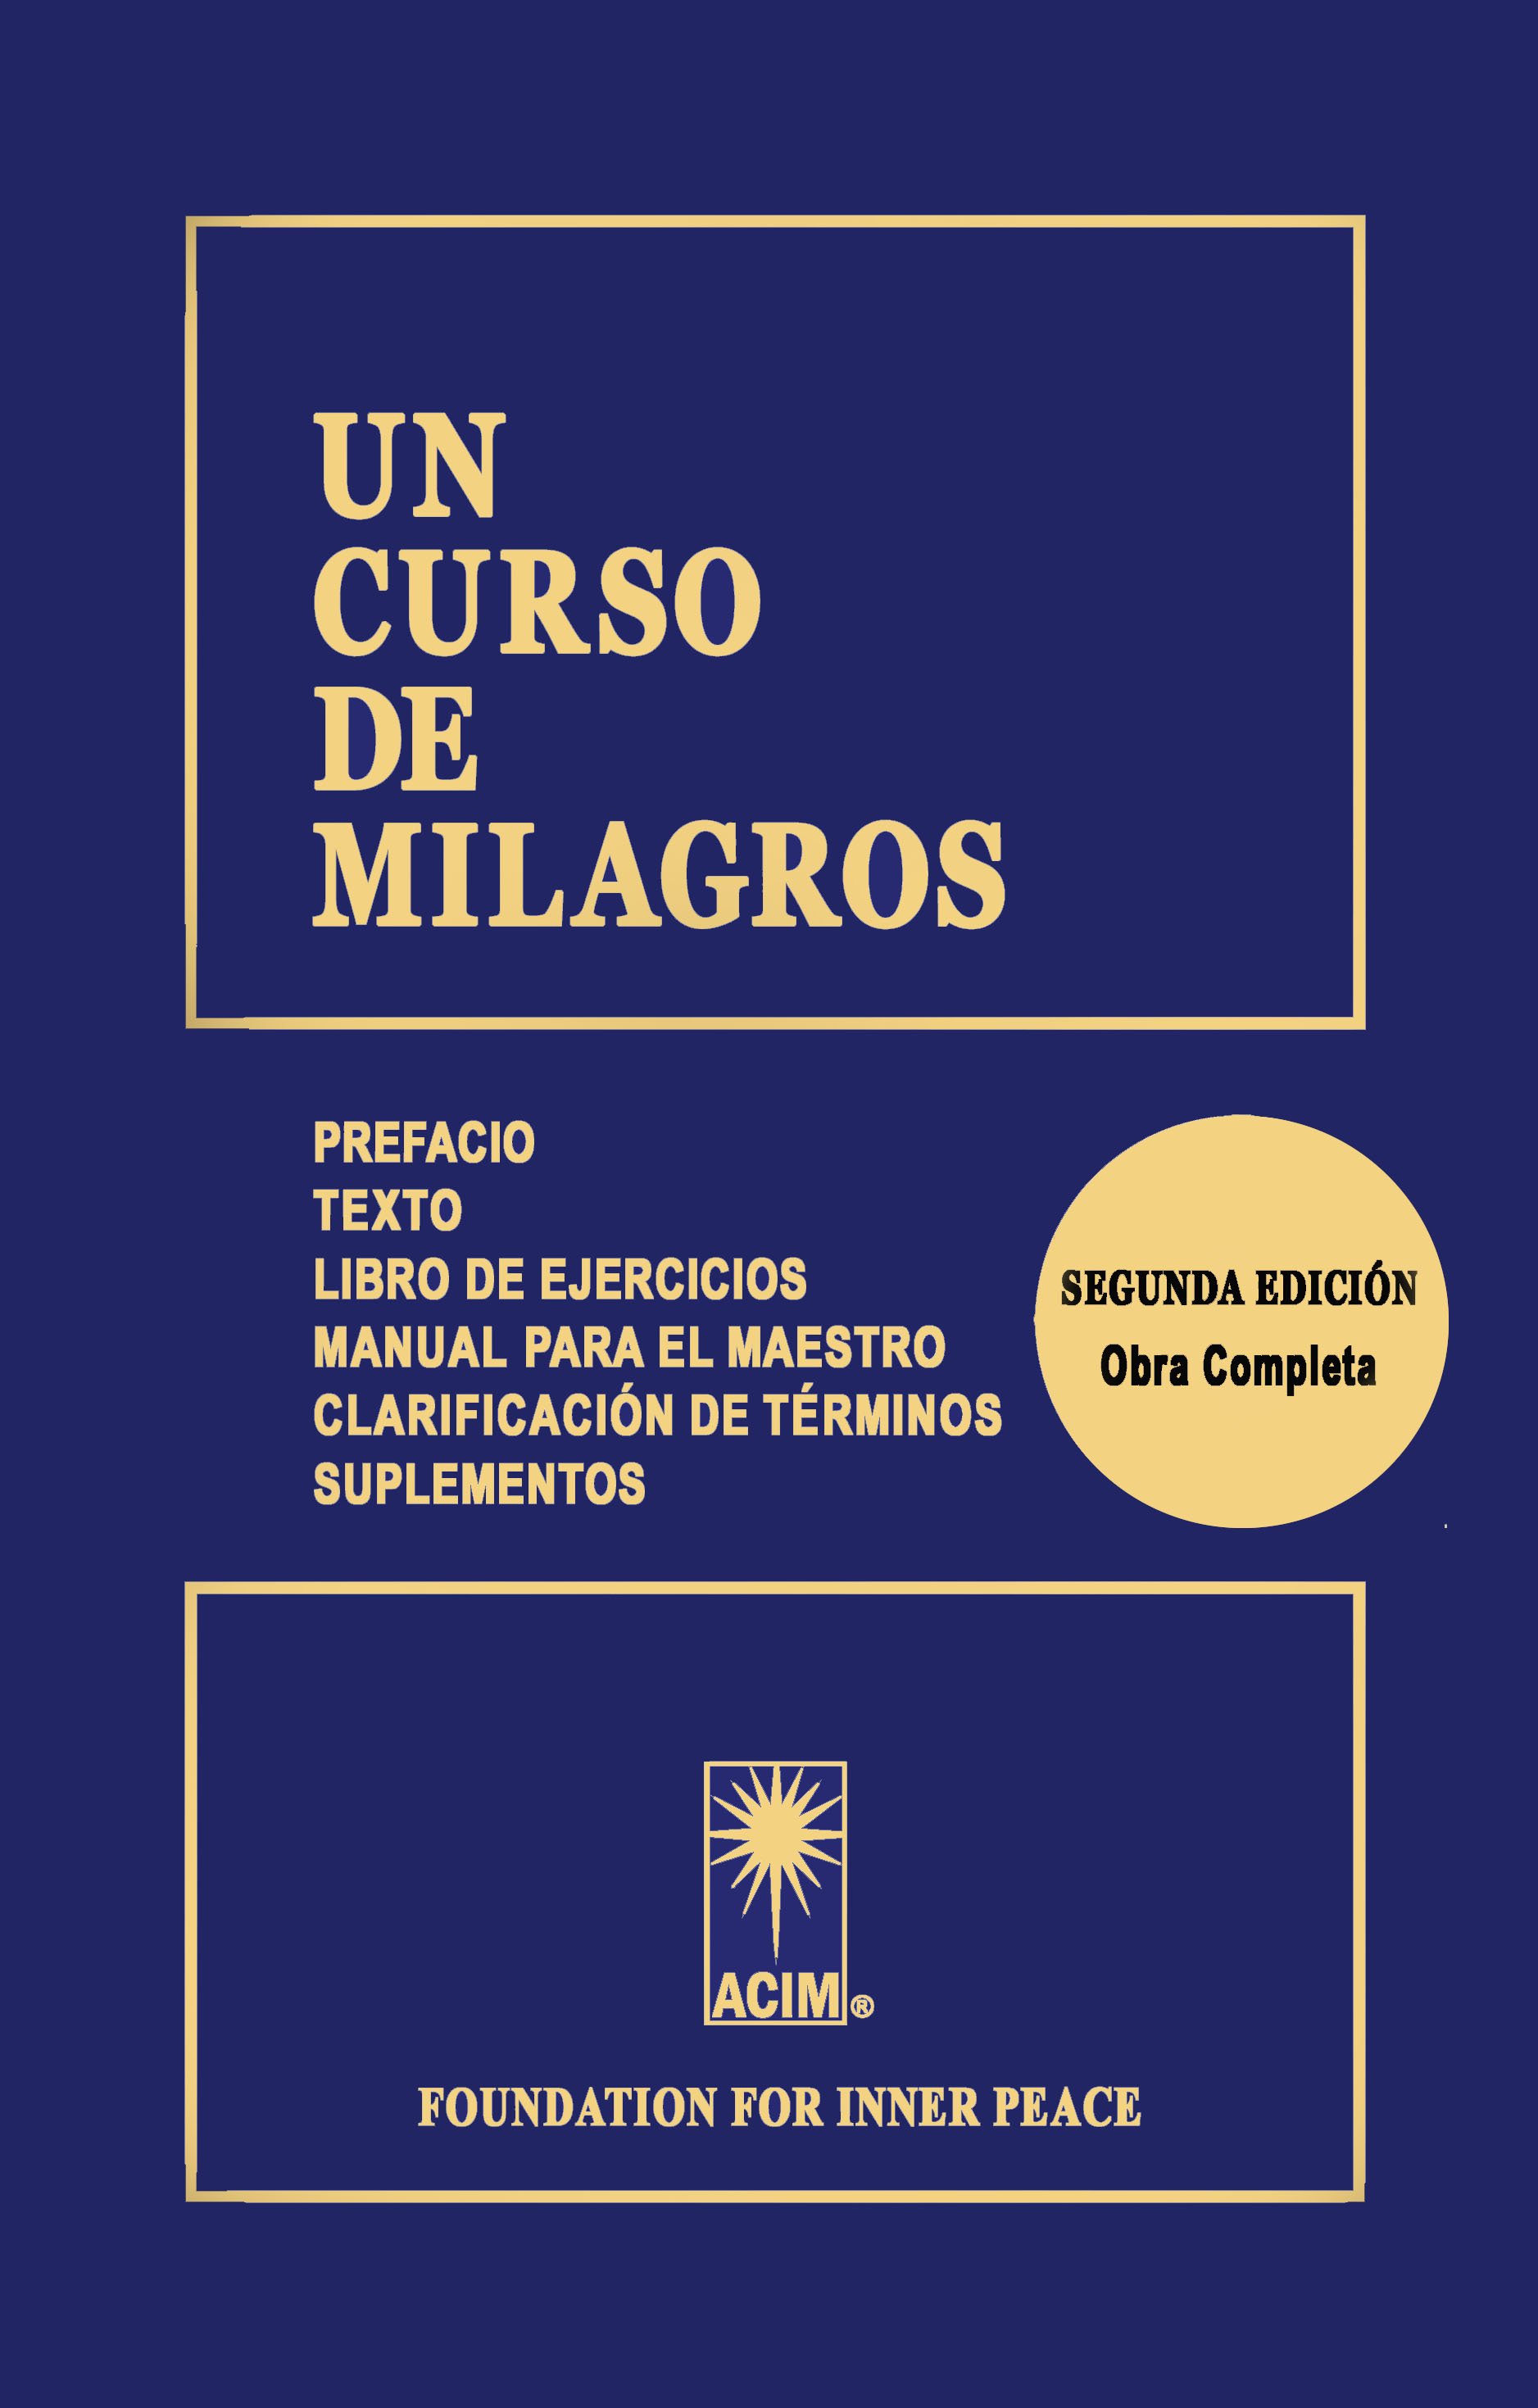 UN CURSO DE MILAGROS (UCDM) - Spanish second edition (Hardcover) - translation of A Course in Miracles; combined volume with supplements